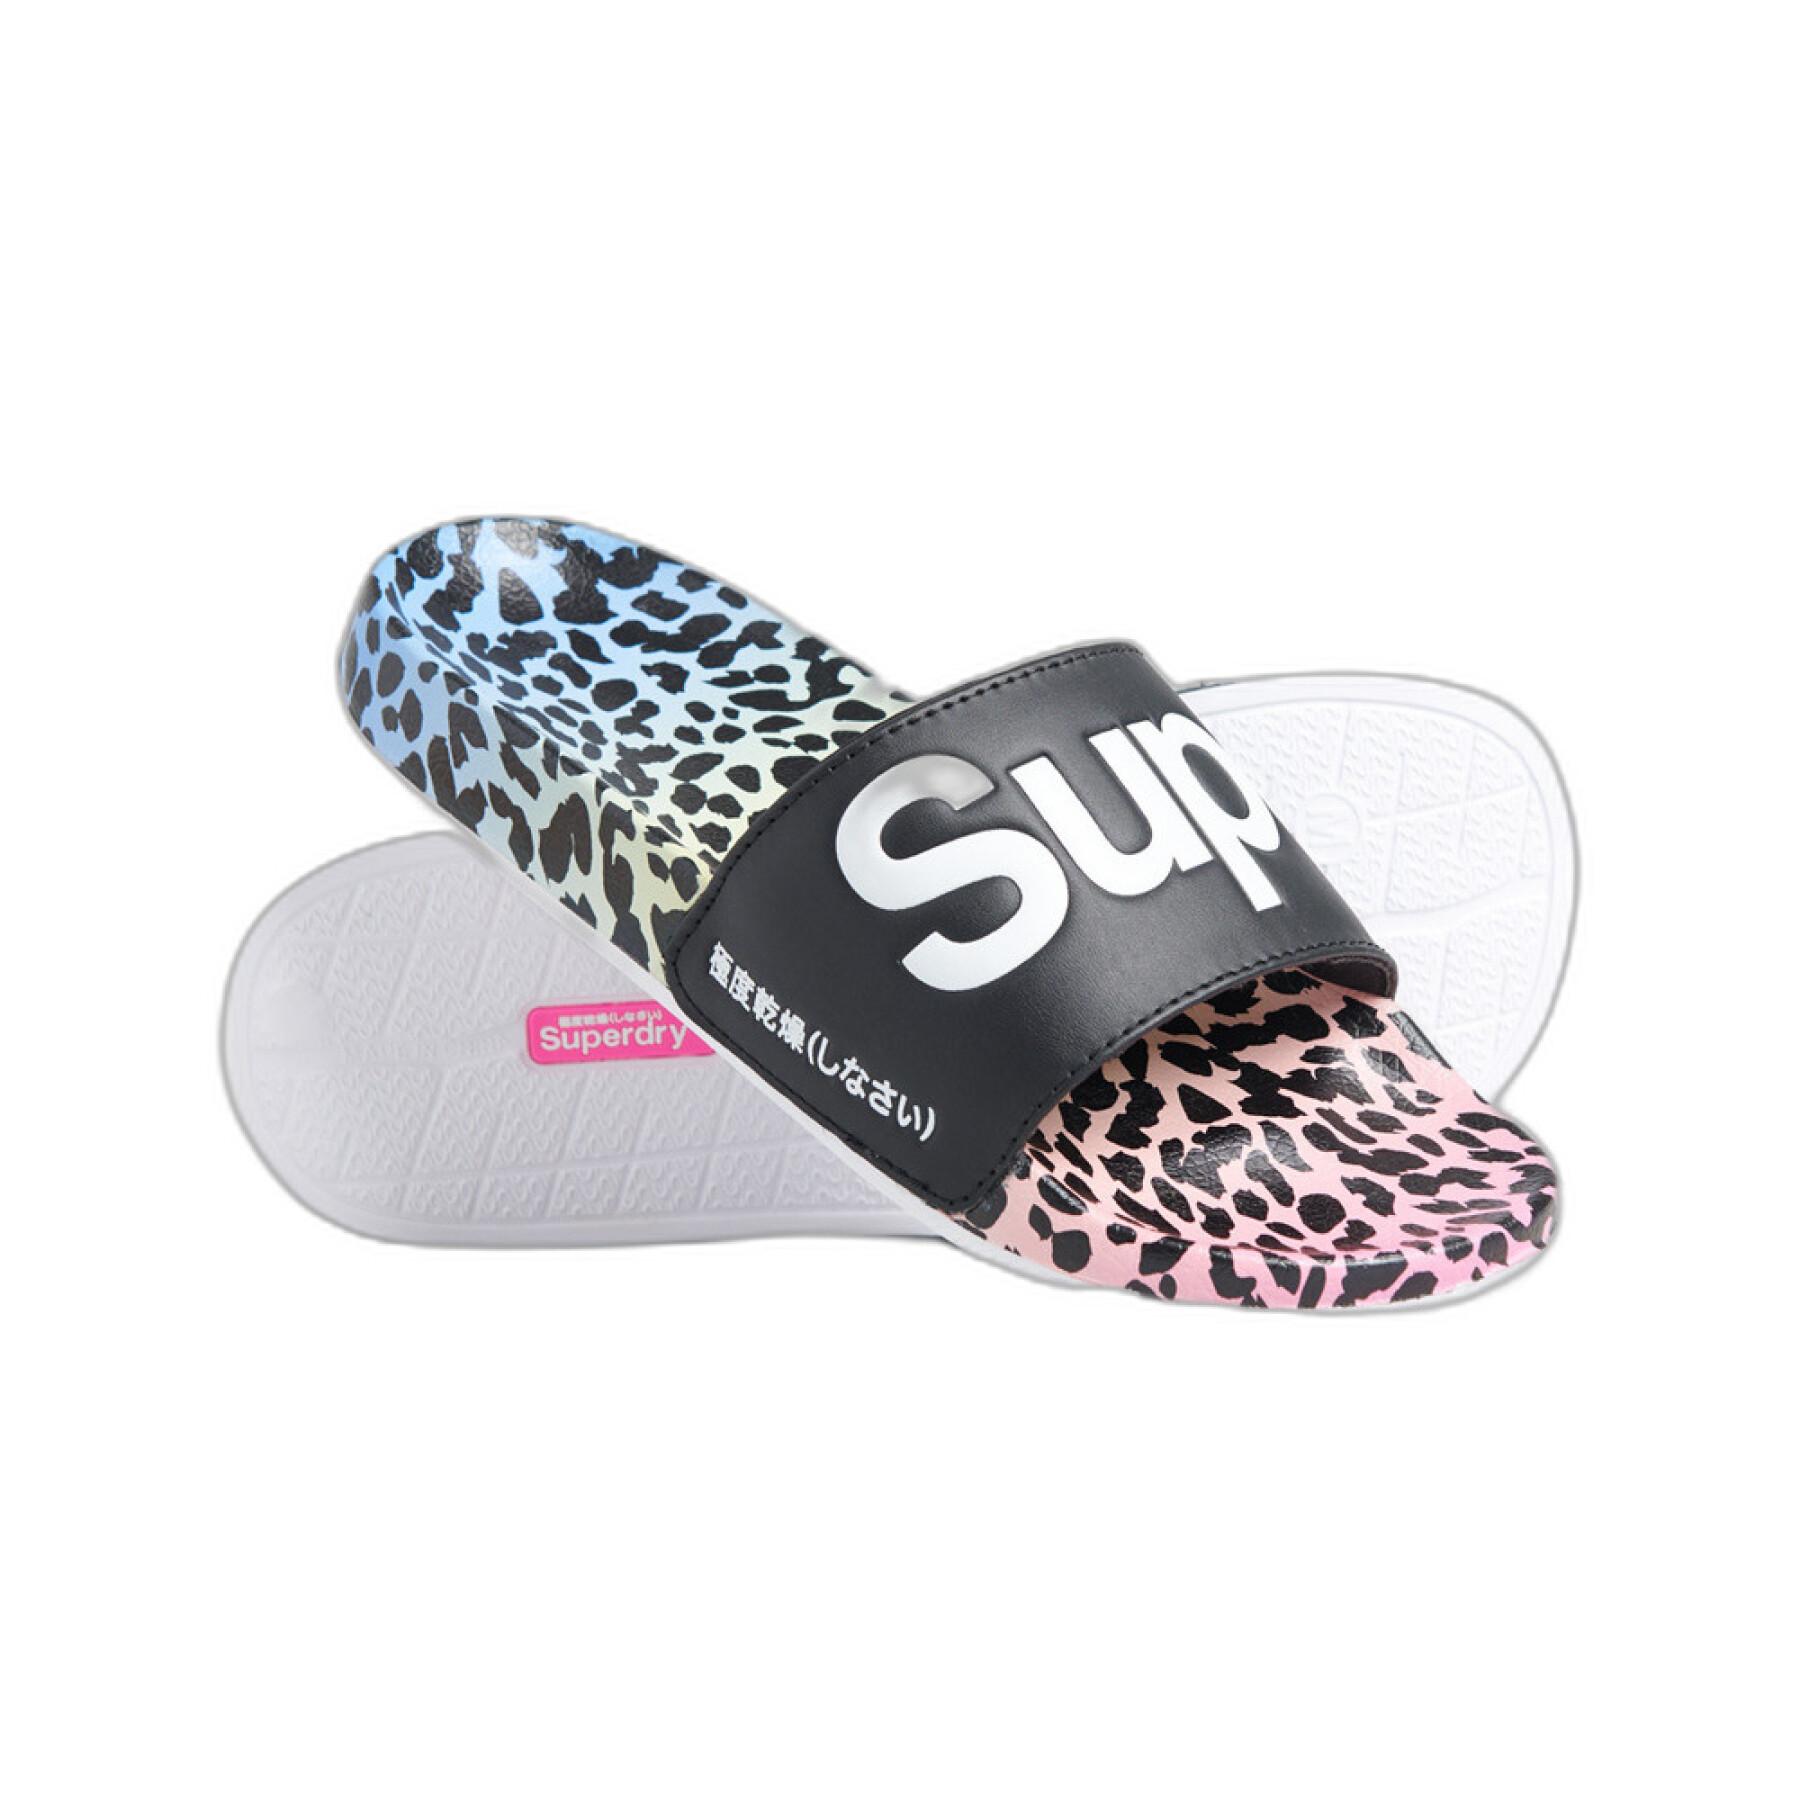 Printed beach slippers on the women's set Superdry